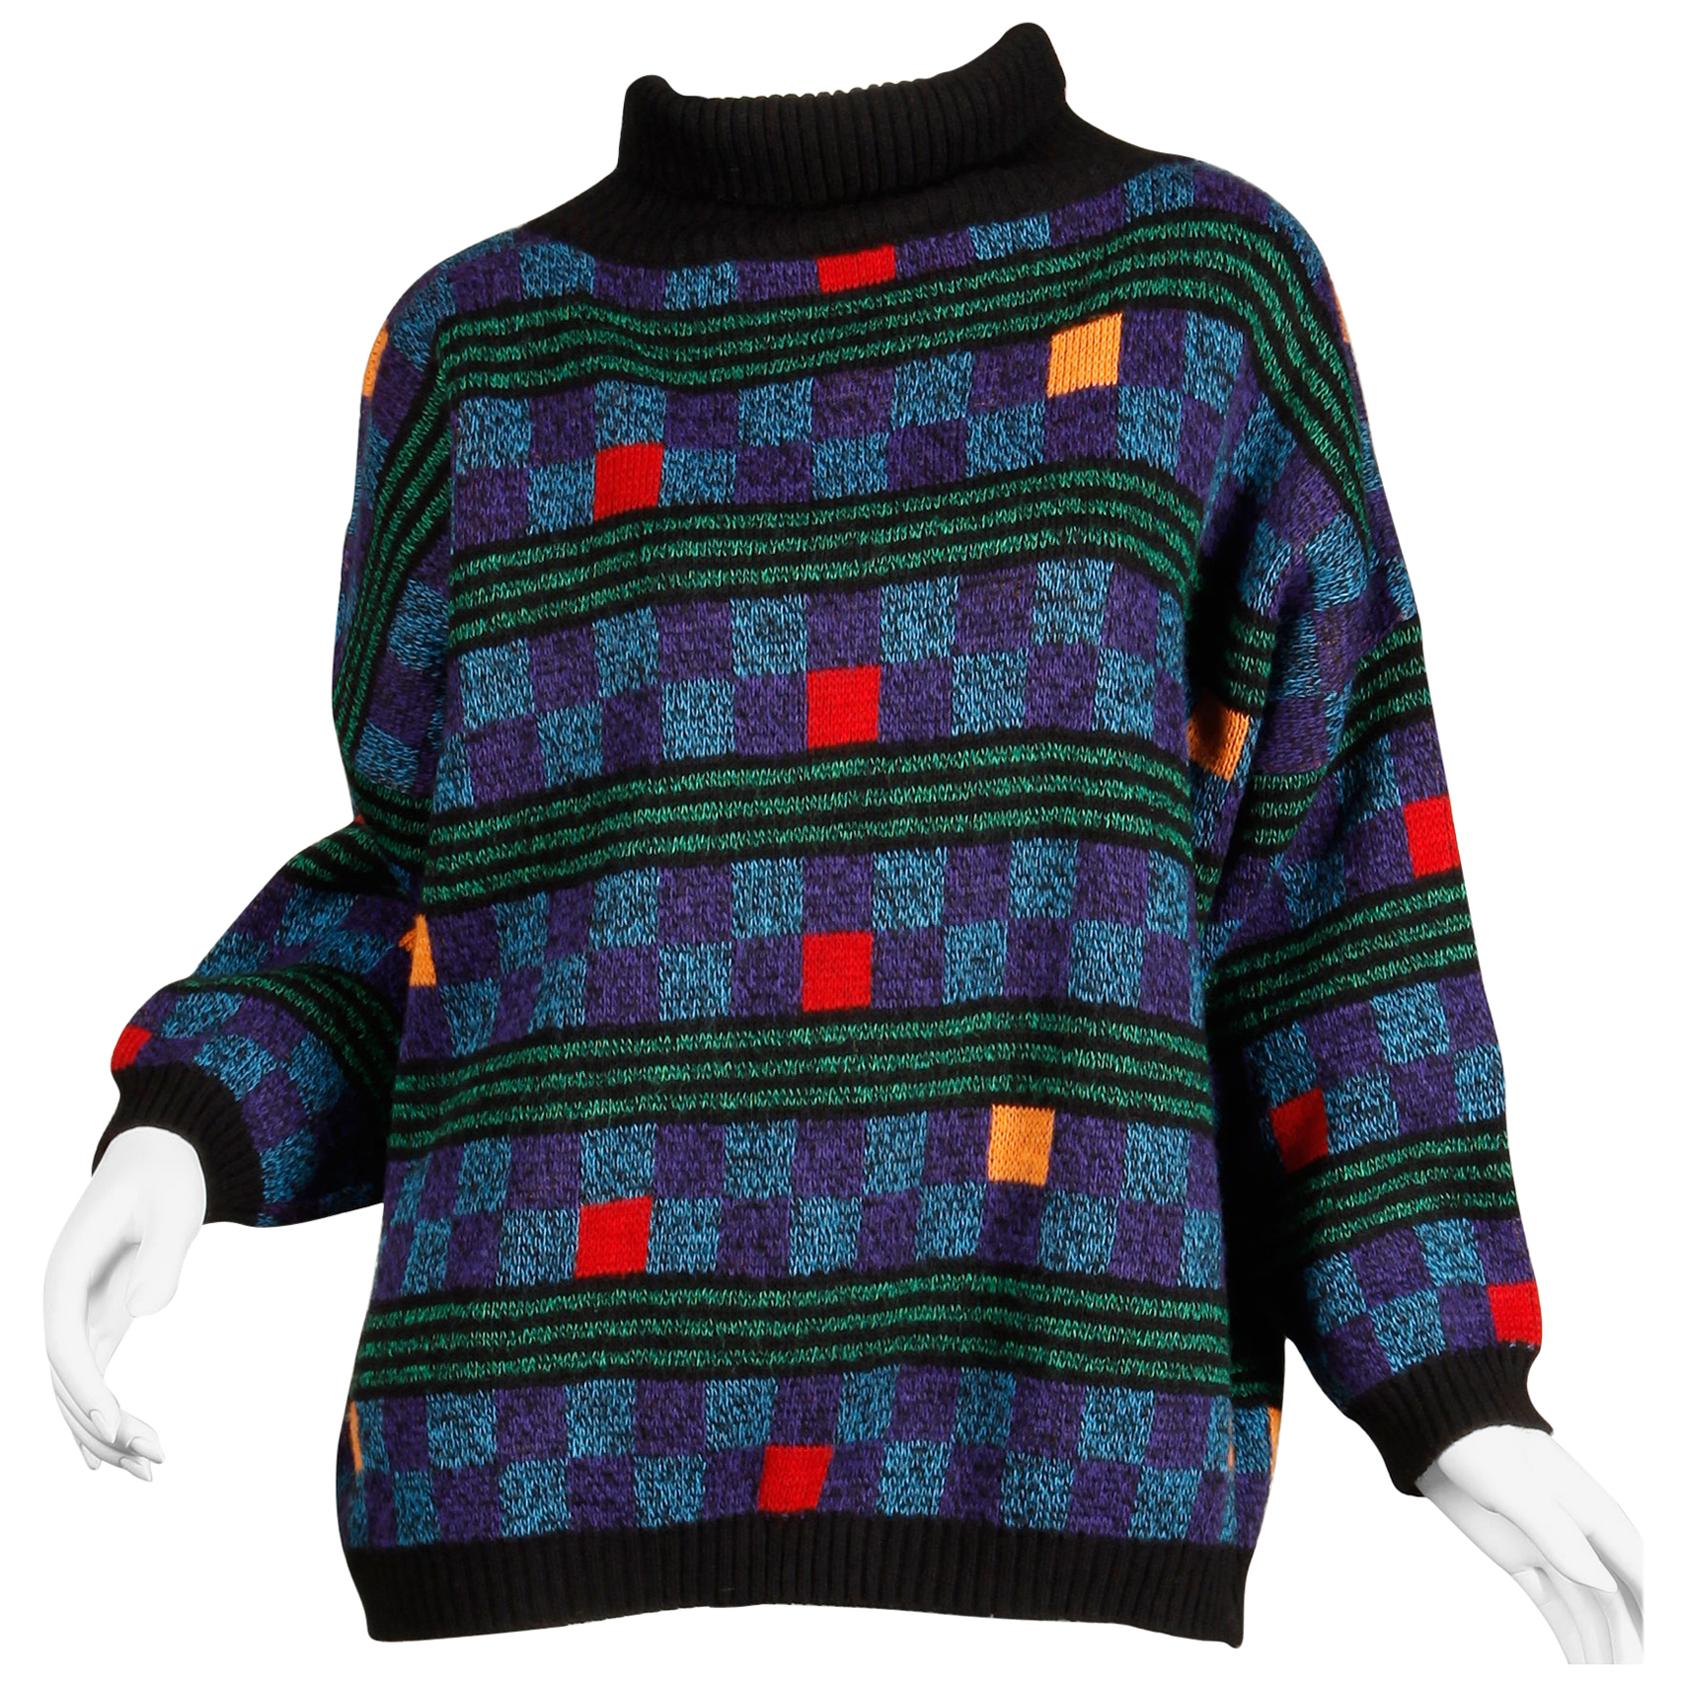 1980s Kenzo Vintage Turtleneck Sweater with Colorful Checkers + Stripes